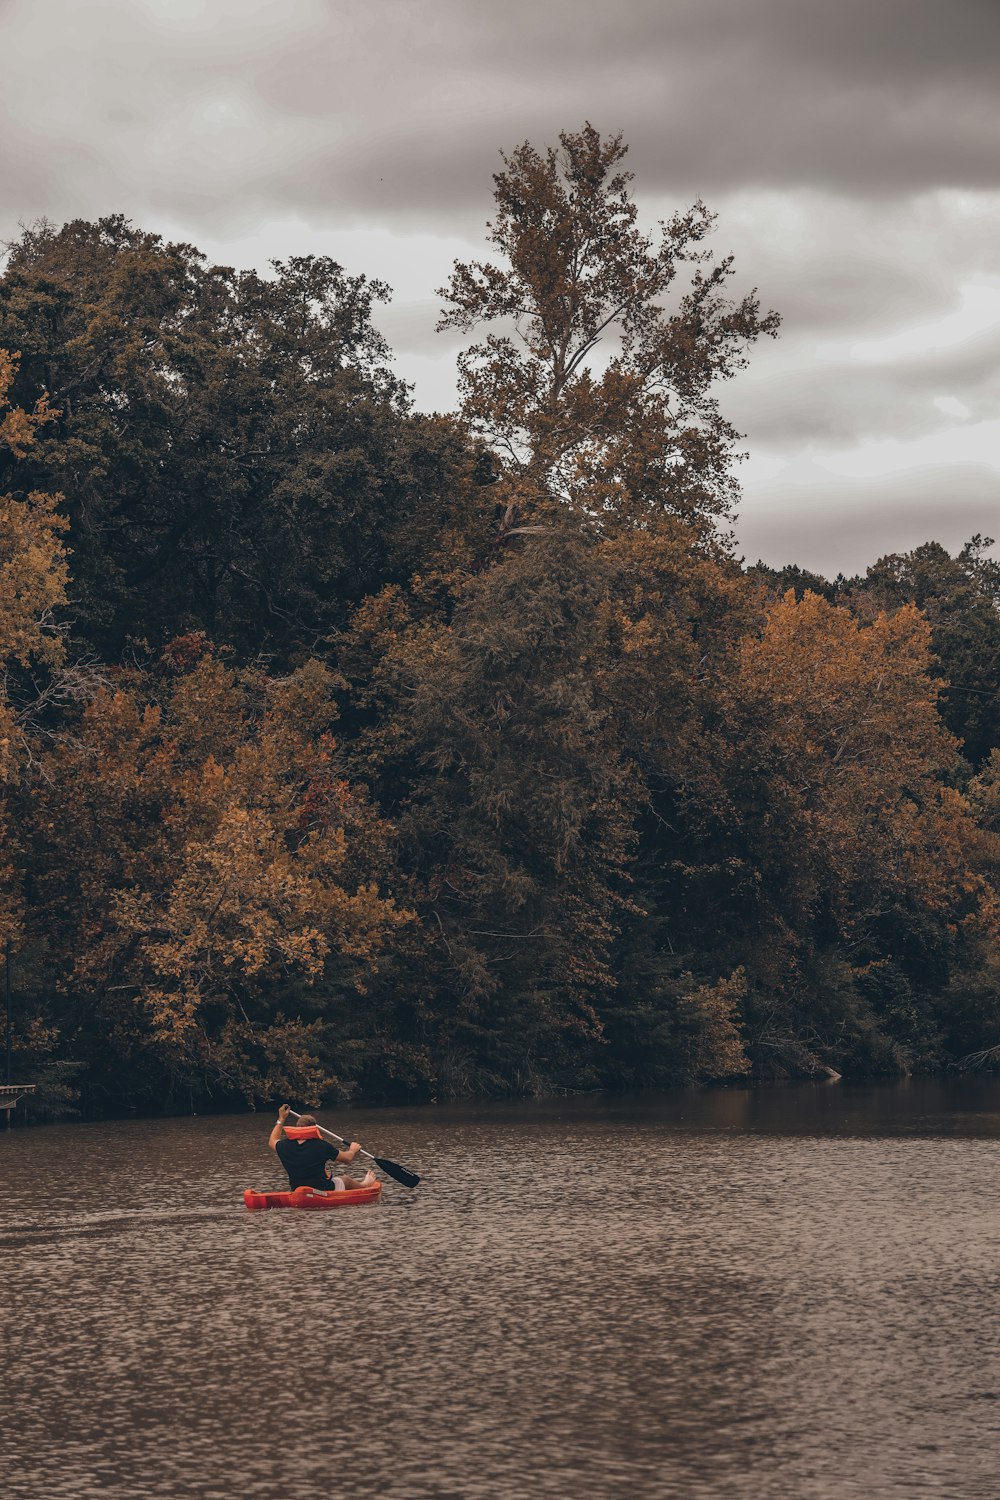 a couple people in a kayak on a river with trees in the background